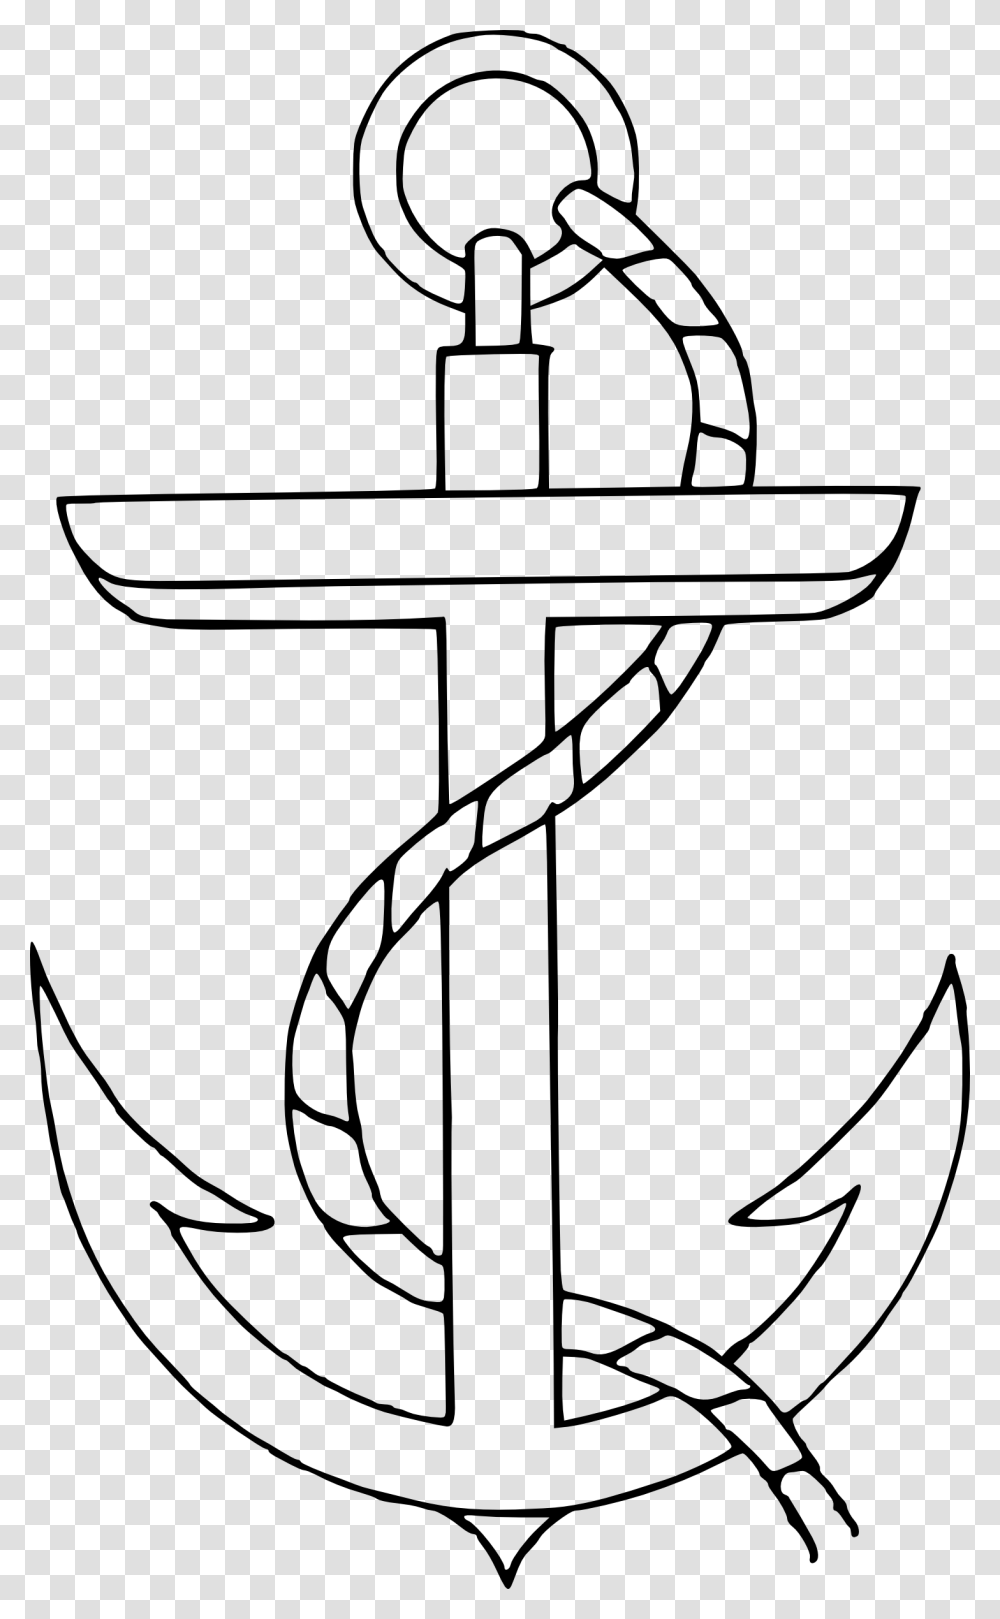 Free Anchor Department Image Clipart White Anchor Clip Art, Hook Transparent Png